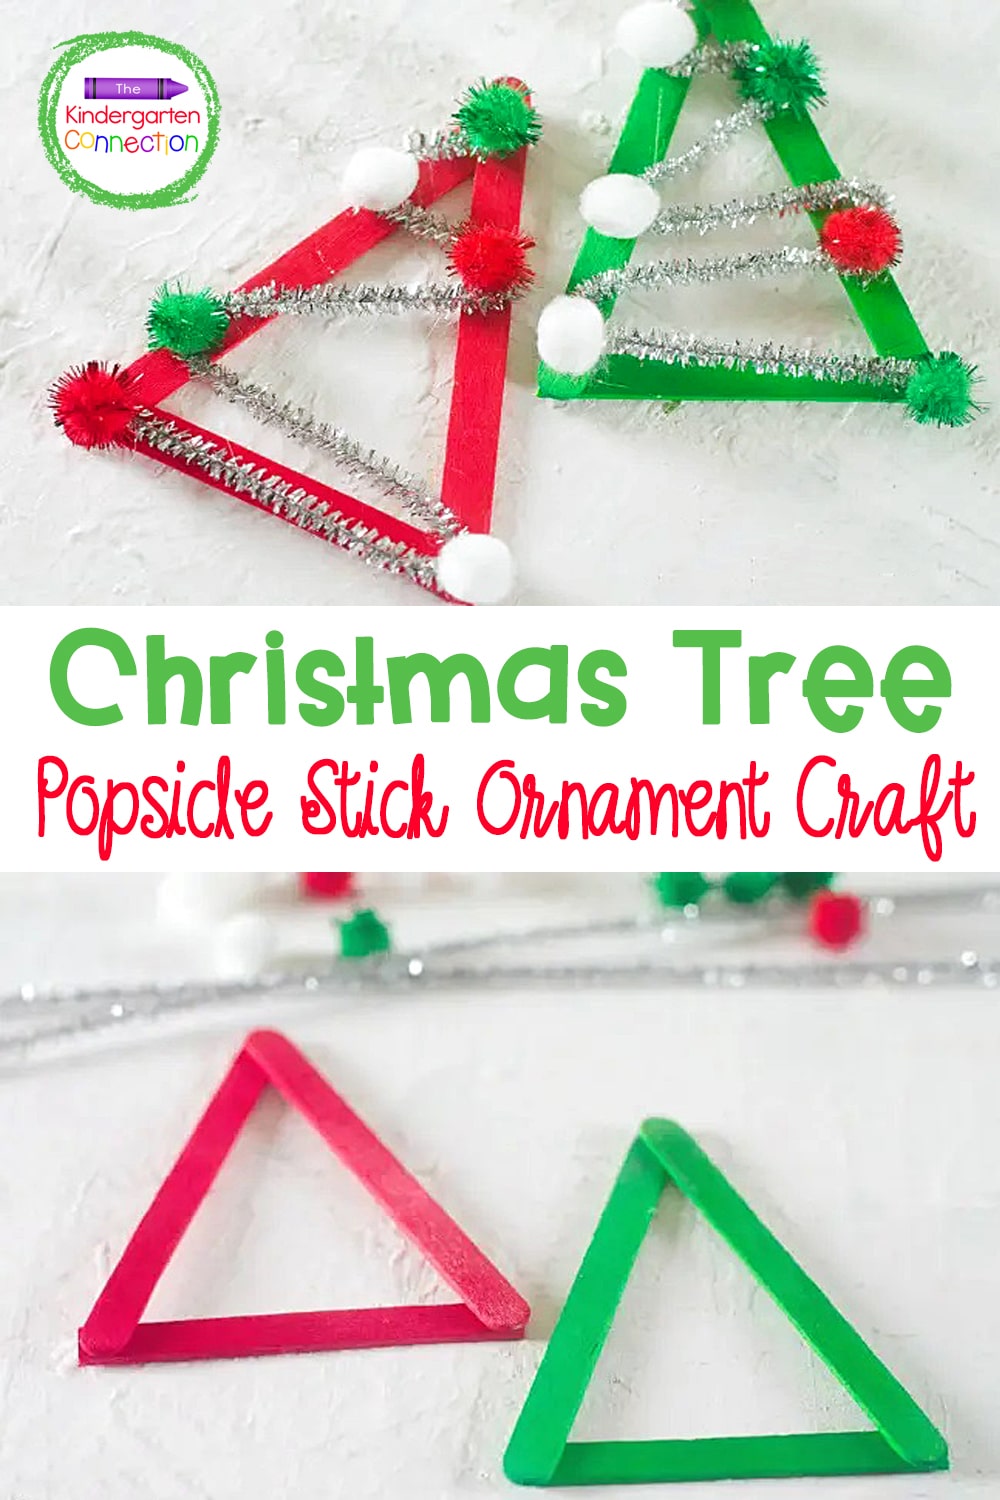 This adorable Christmas Tree Popsicle Stick Ornament is so simple to make and is a great kid craft to do in the classroom and send home!